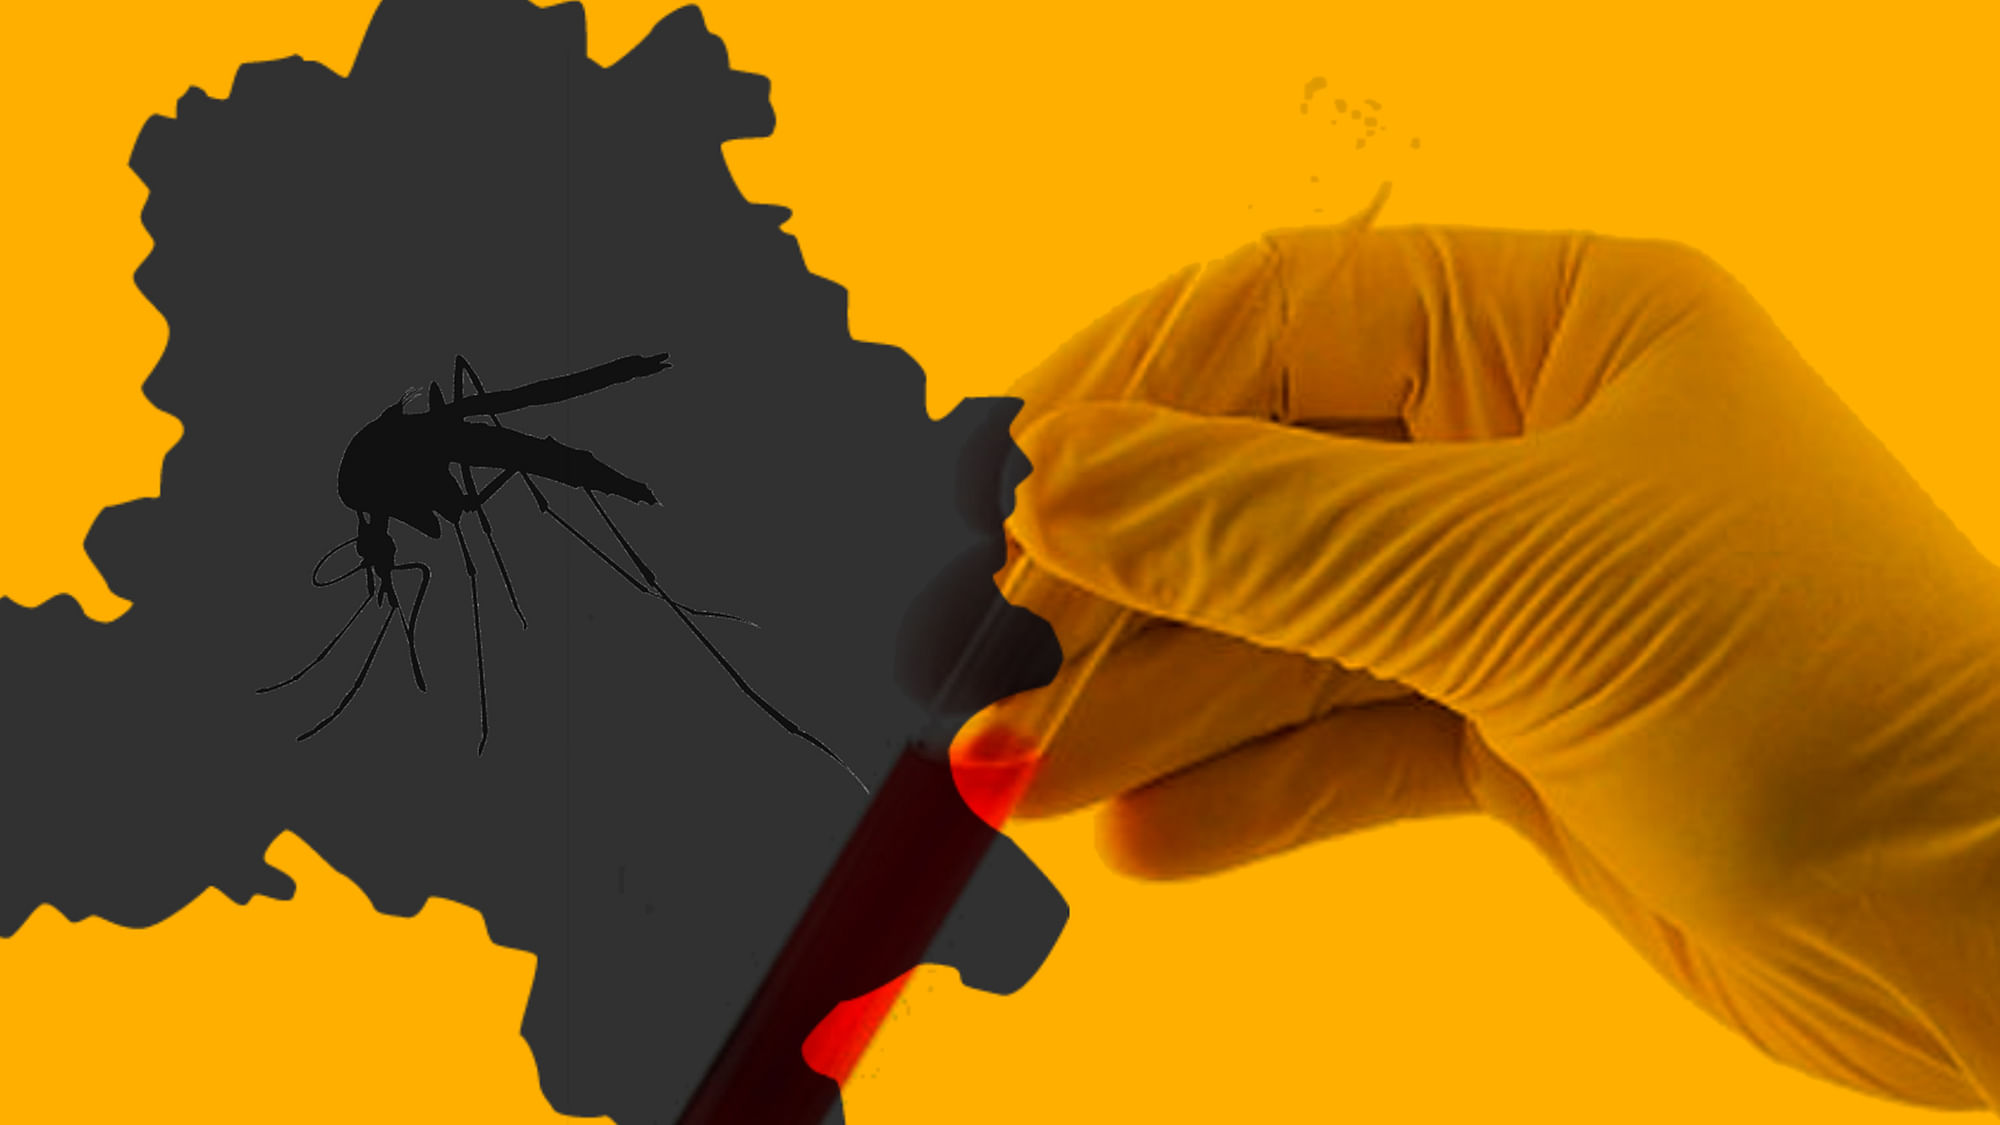 According to a latest municipal report, at least 657 people have been affected by dengue this season in Delhi alone.